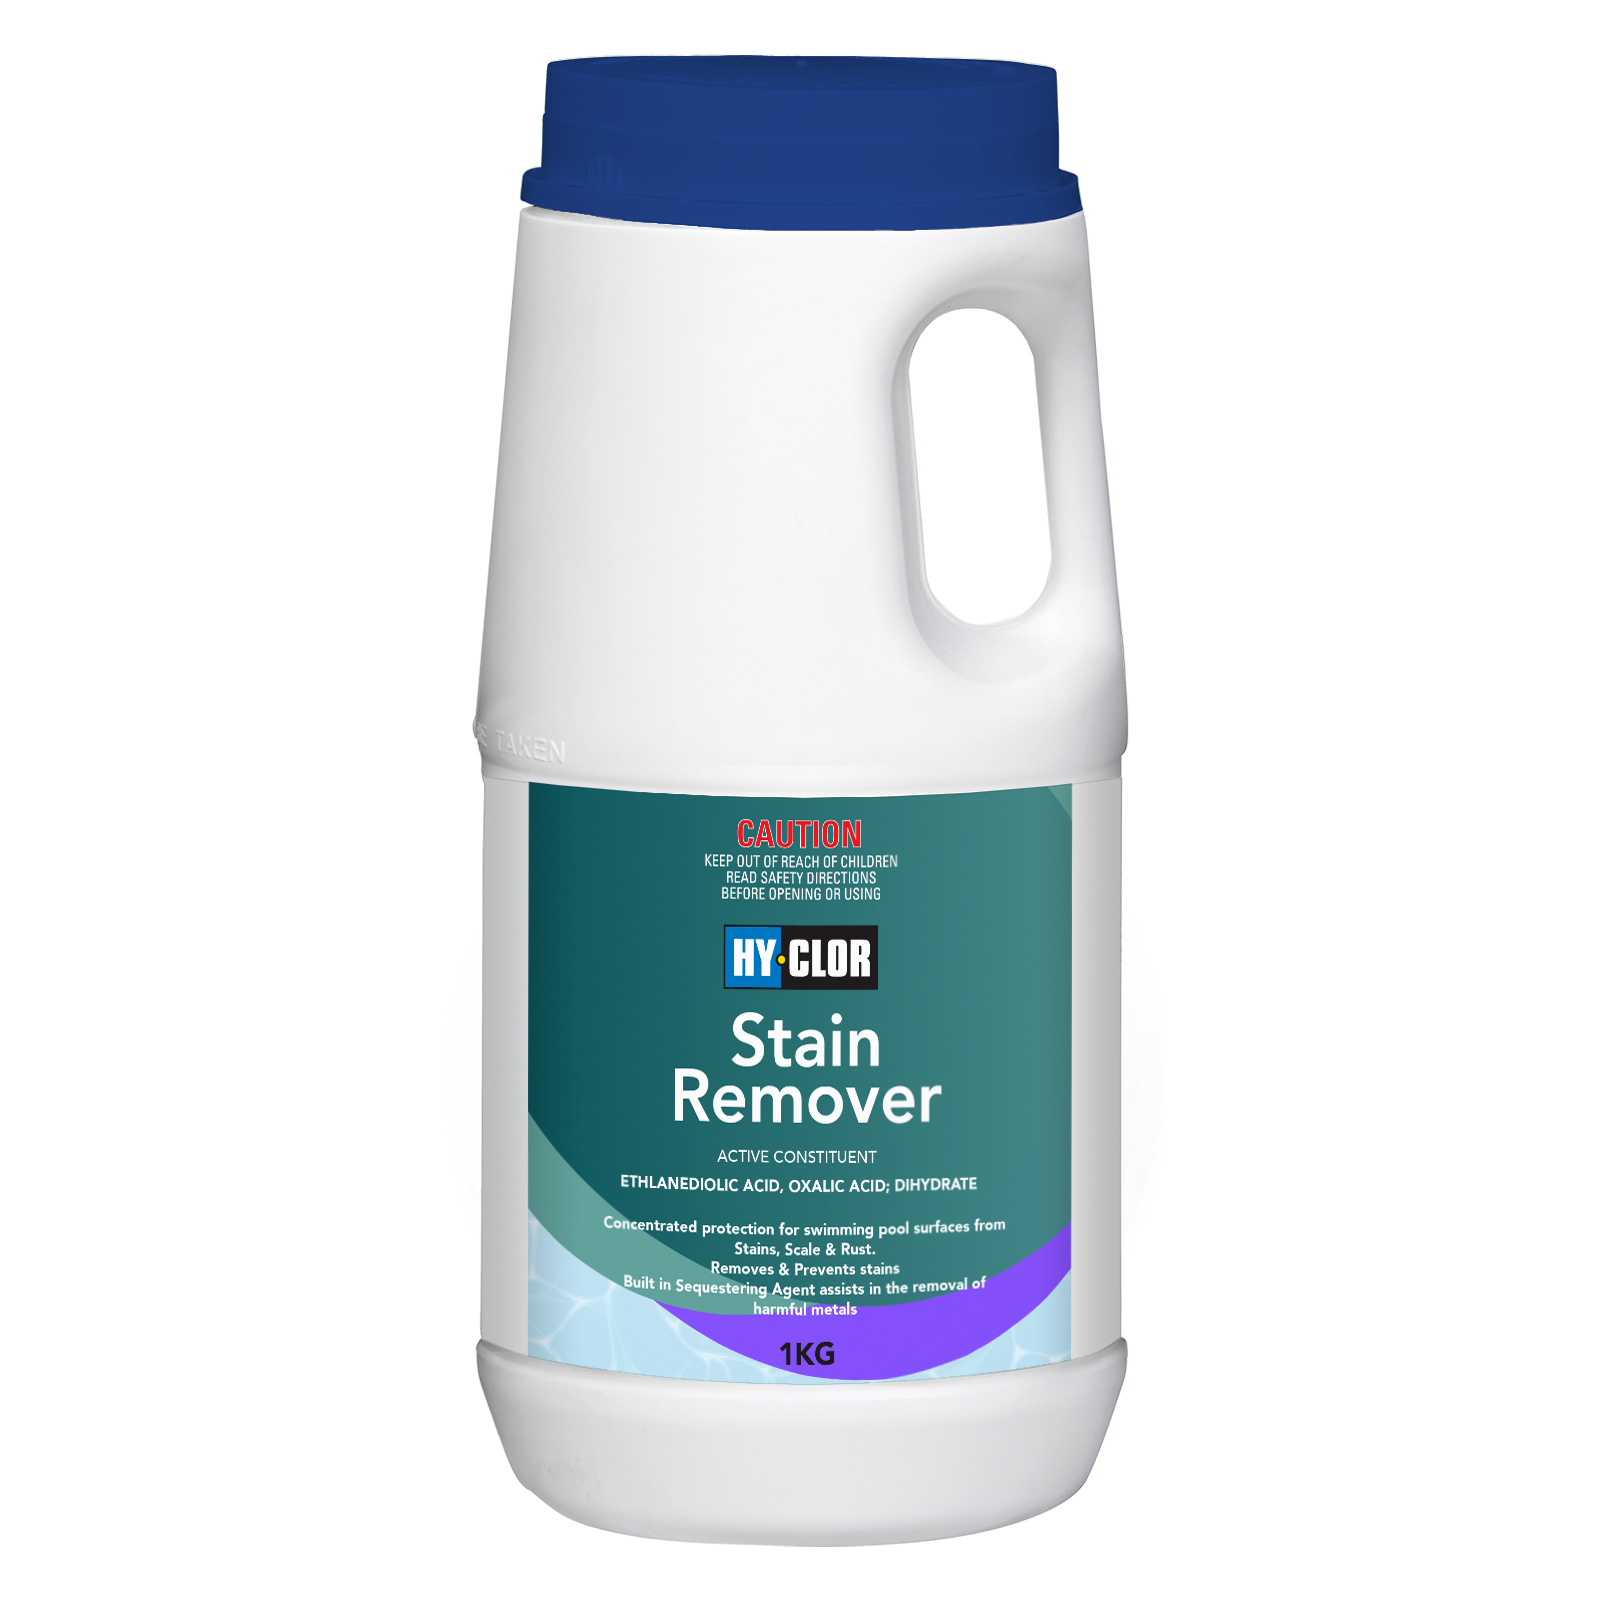 HY-CLOR Stain Remover